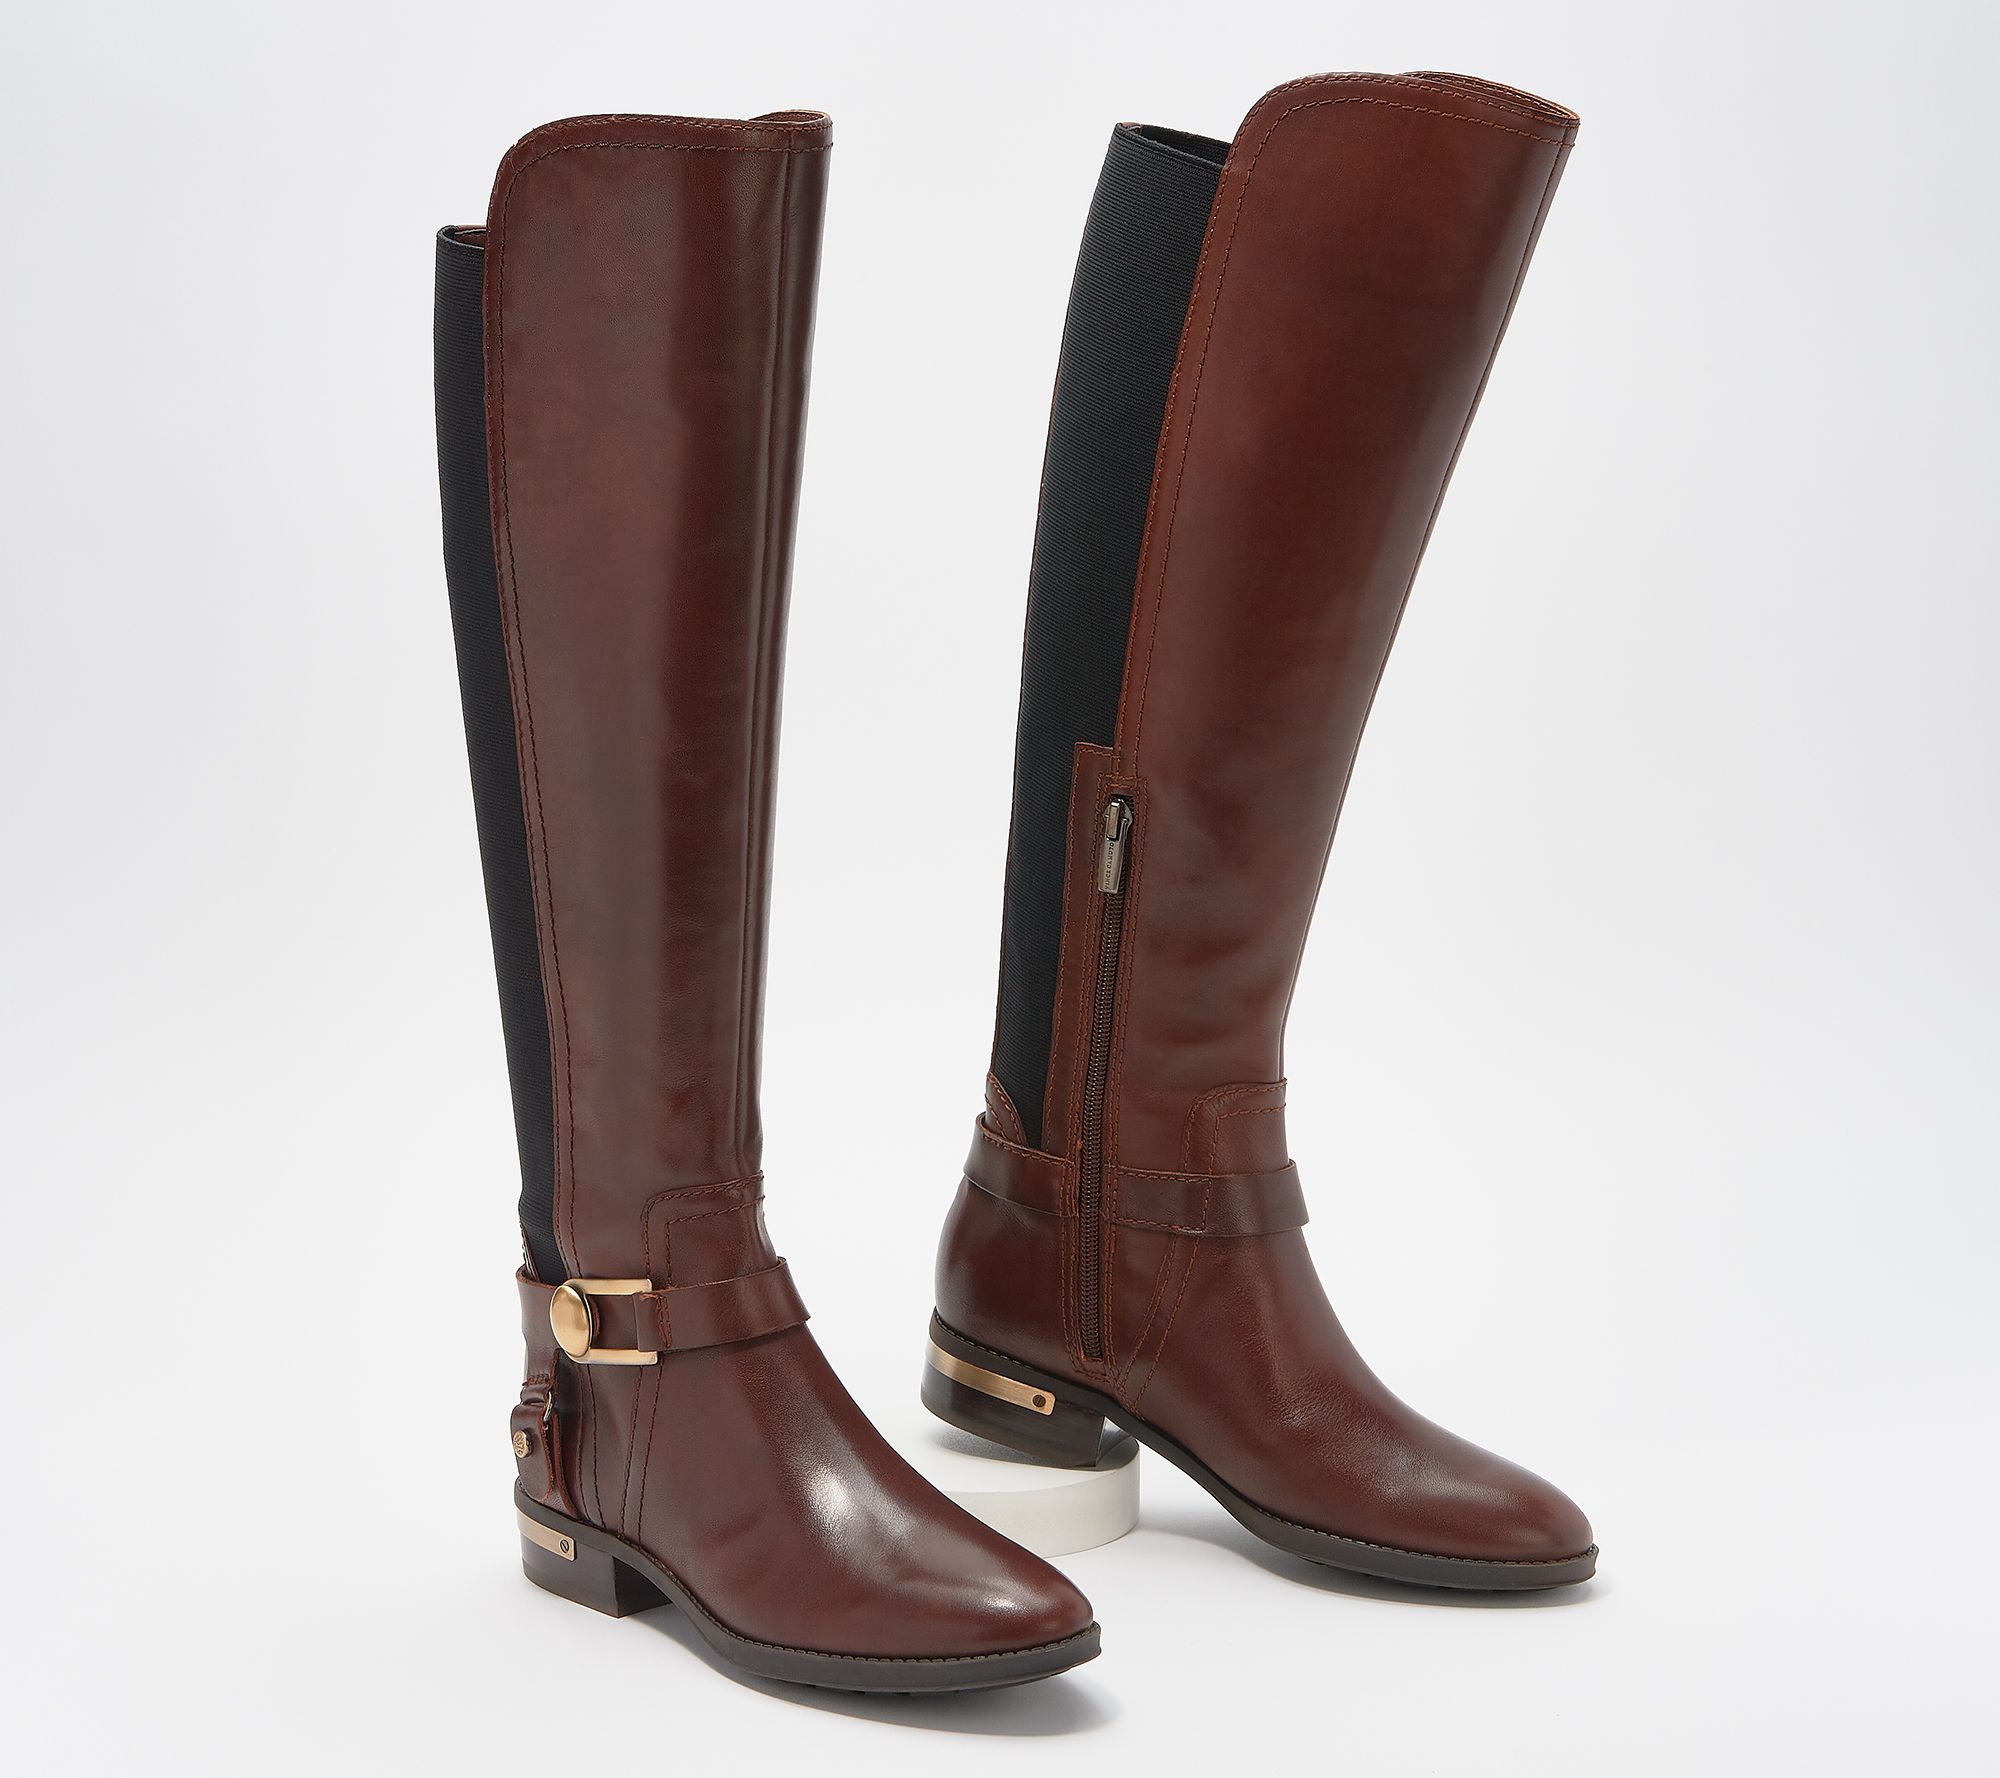 vince camuto tall buckled leather riding boot